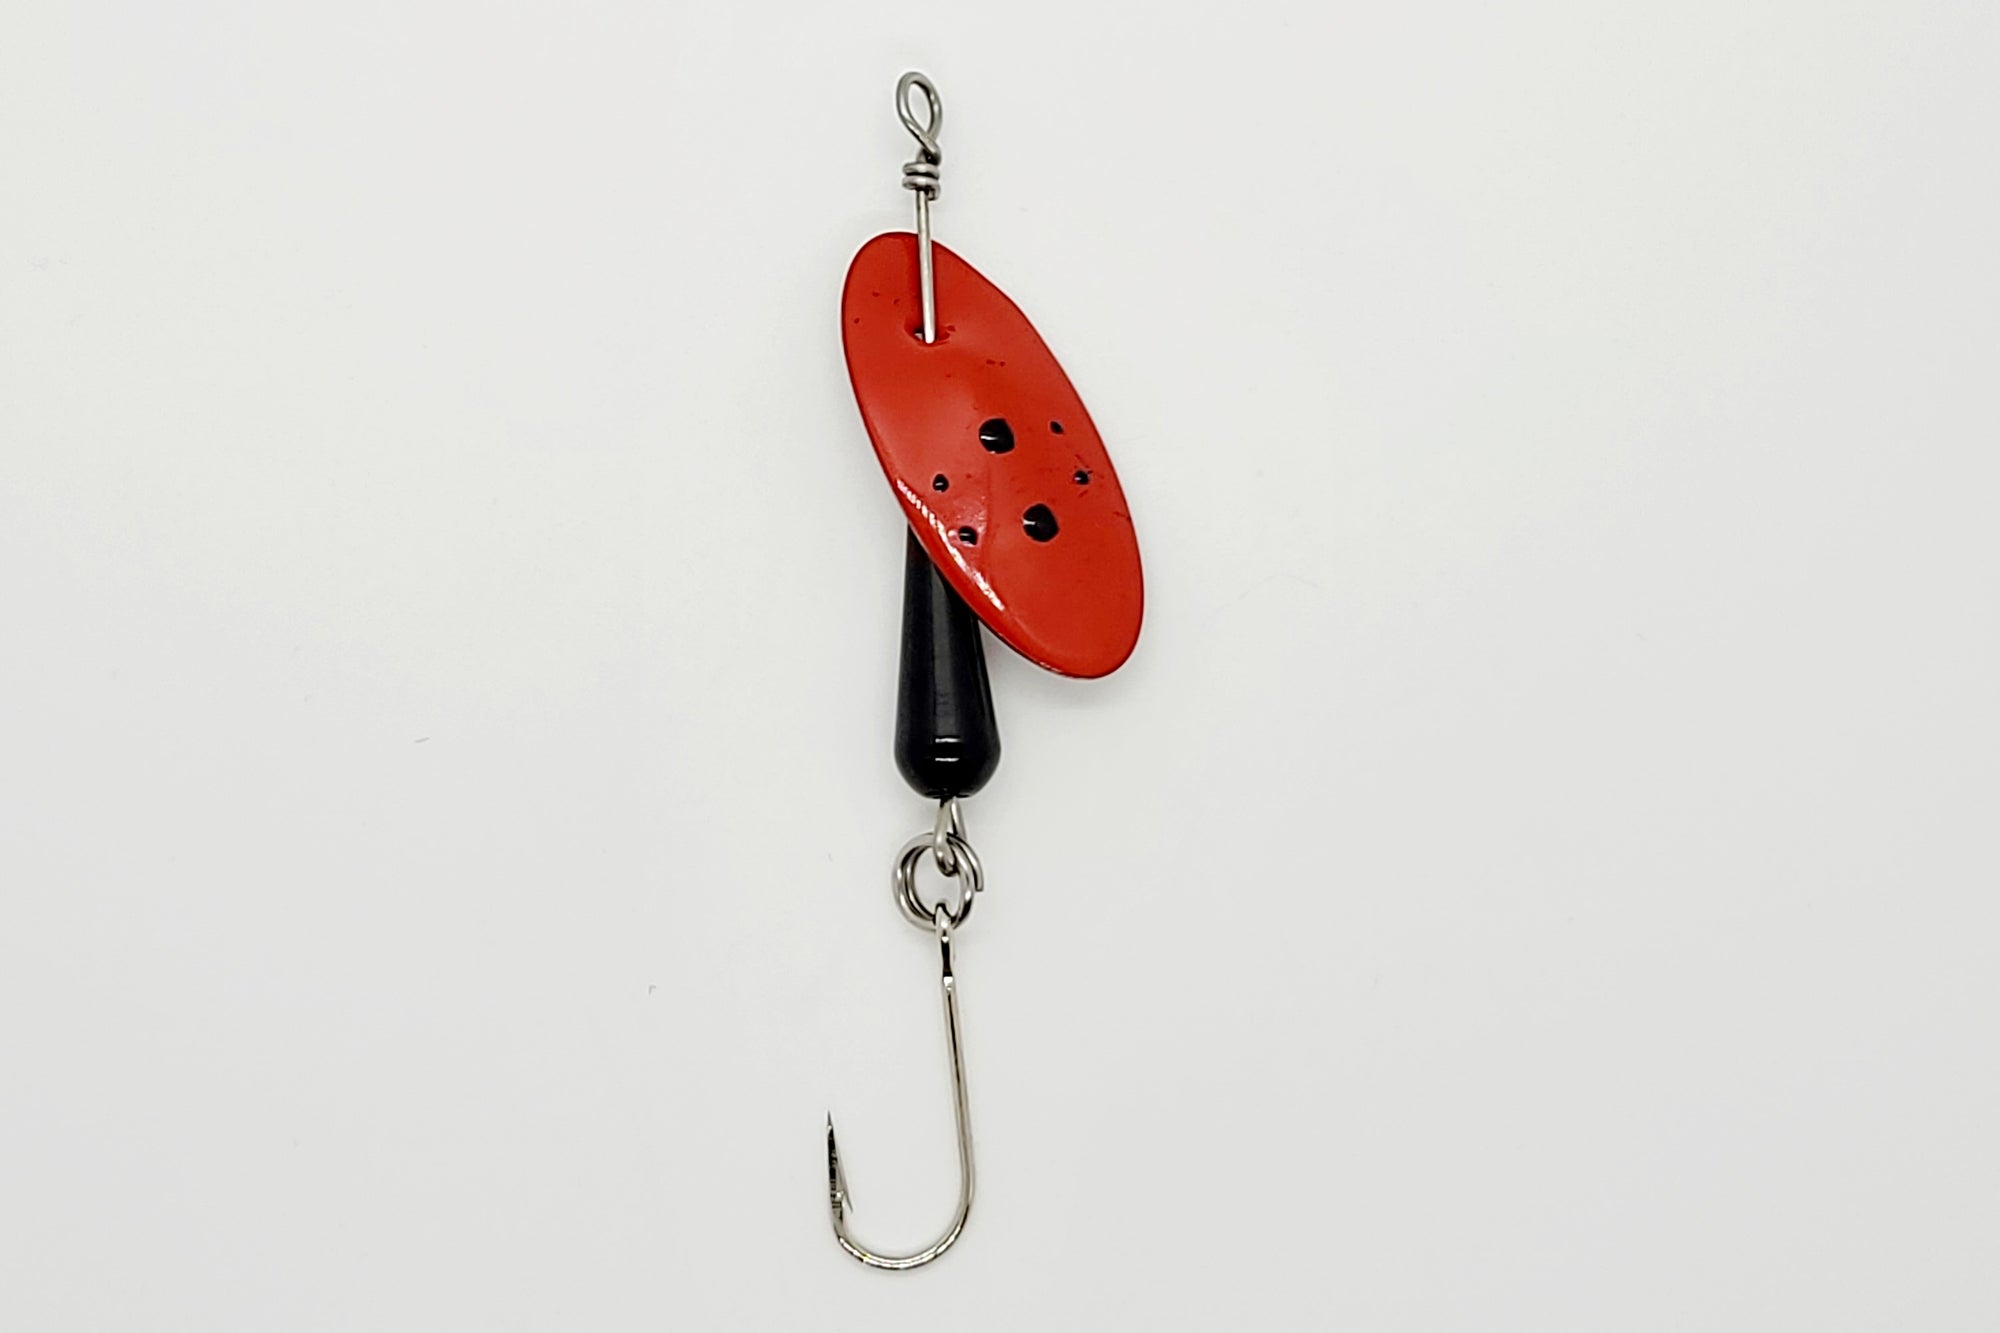 FRENCH BLADE DRESSED SPINNERS - LEAD FREE - Get'n Hook'd Lures